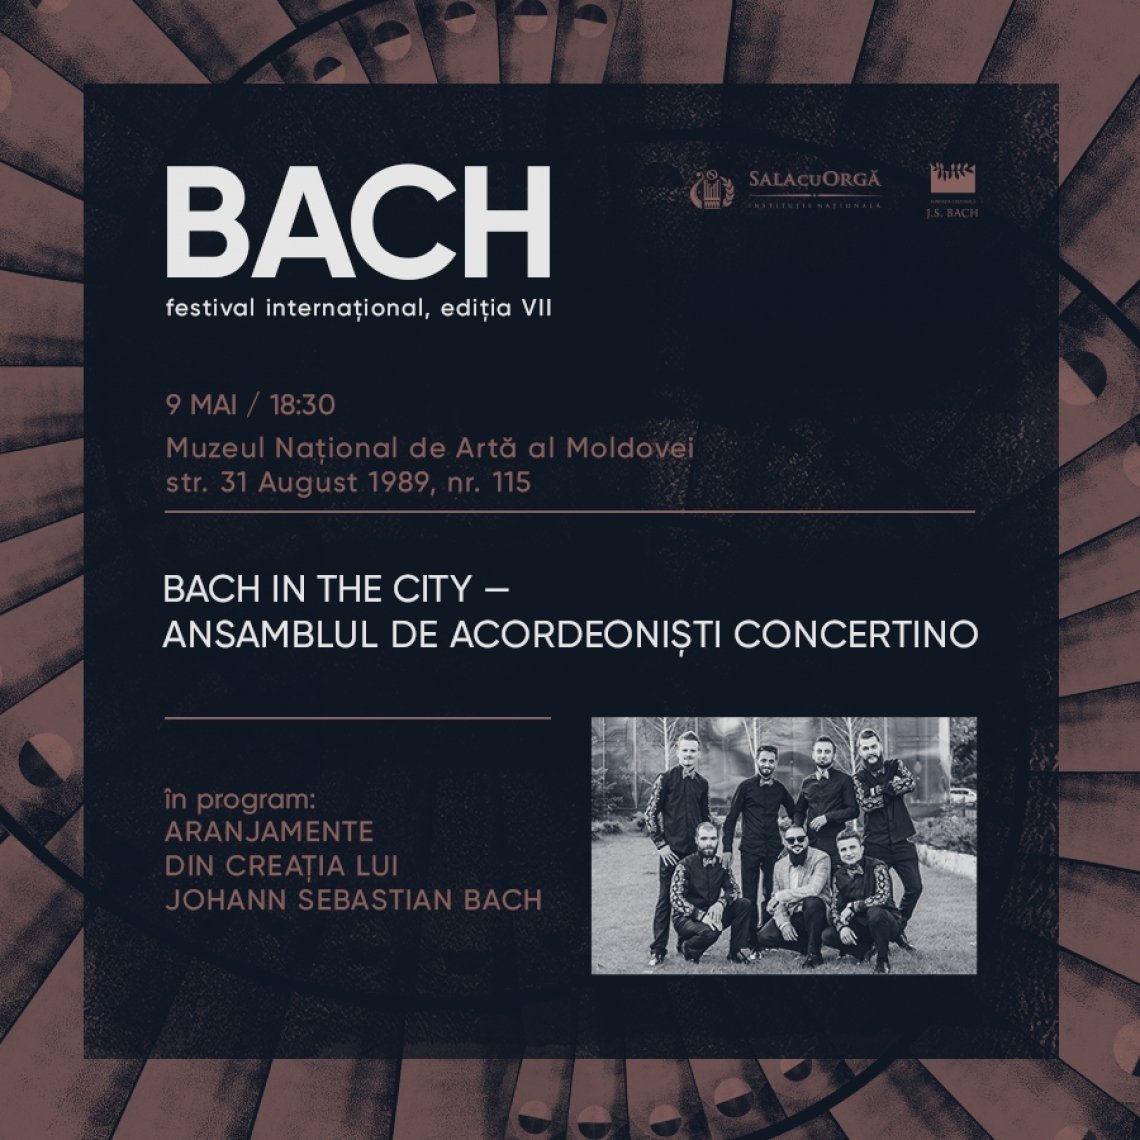 BACH IN THE CITY